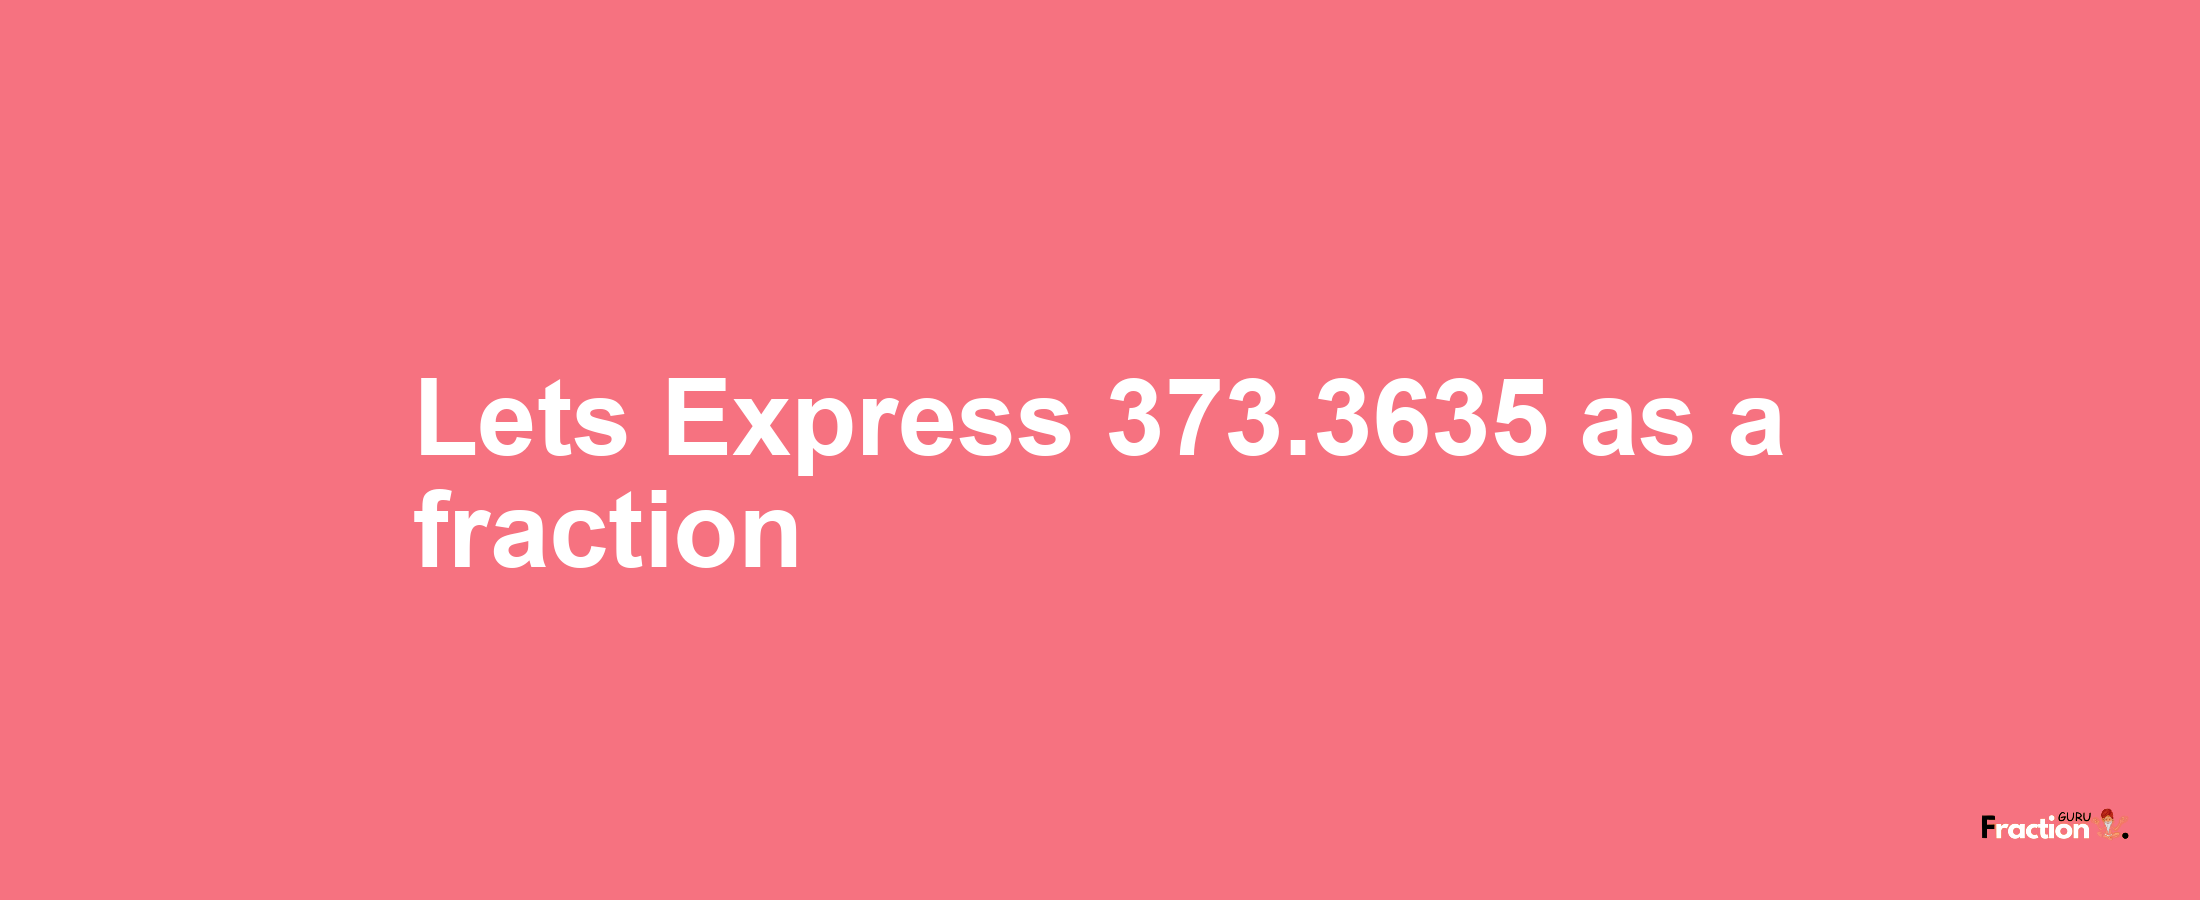 Lets Express 373.3635 as afraction